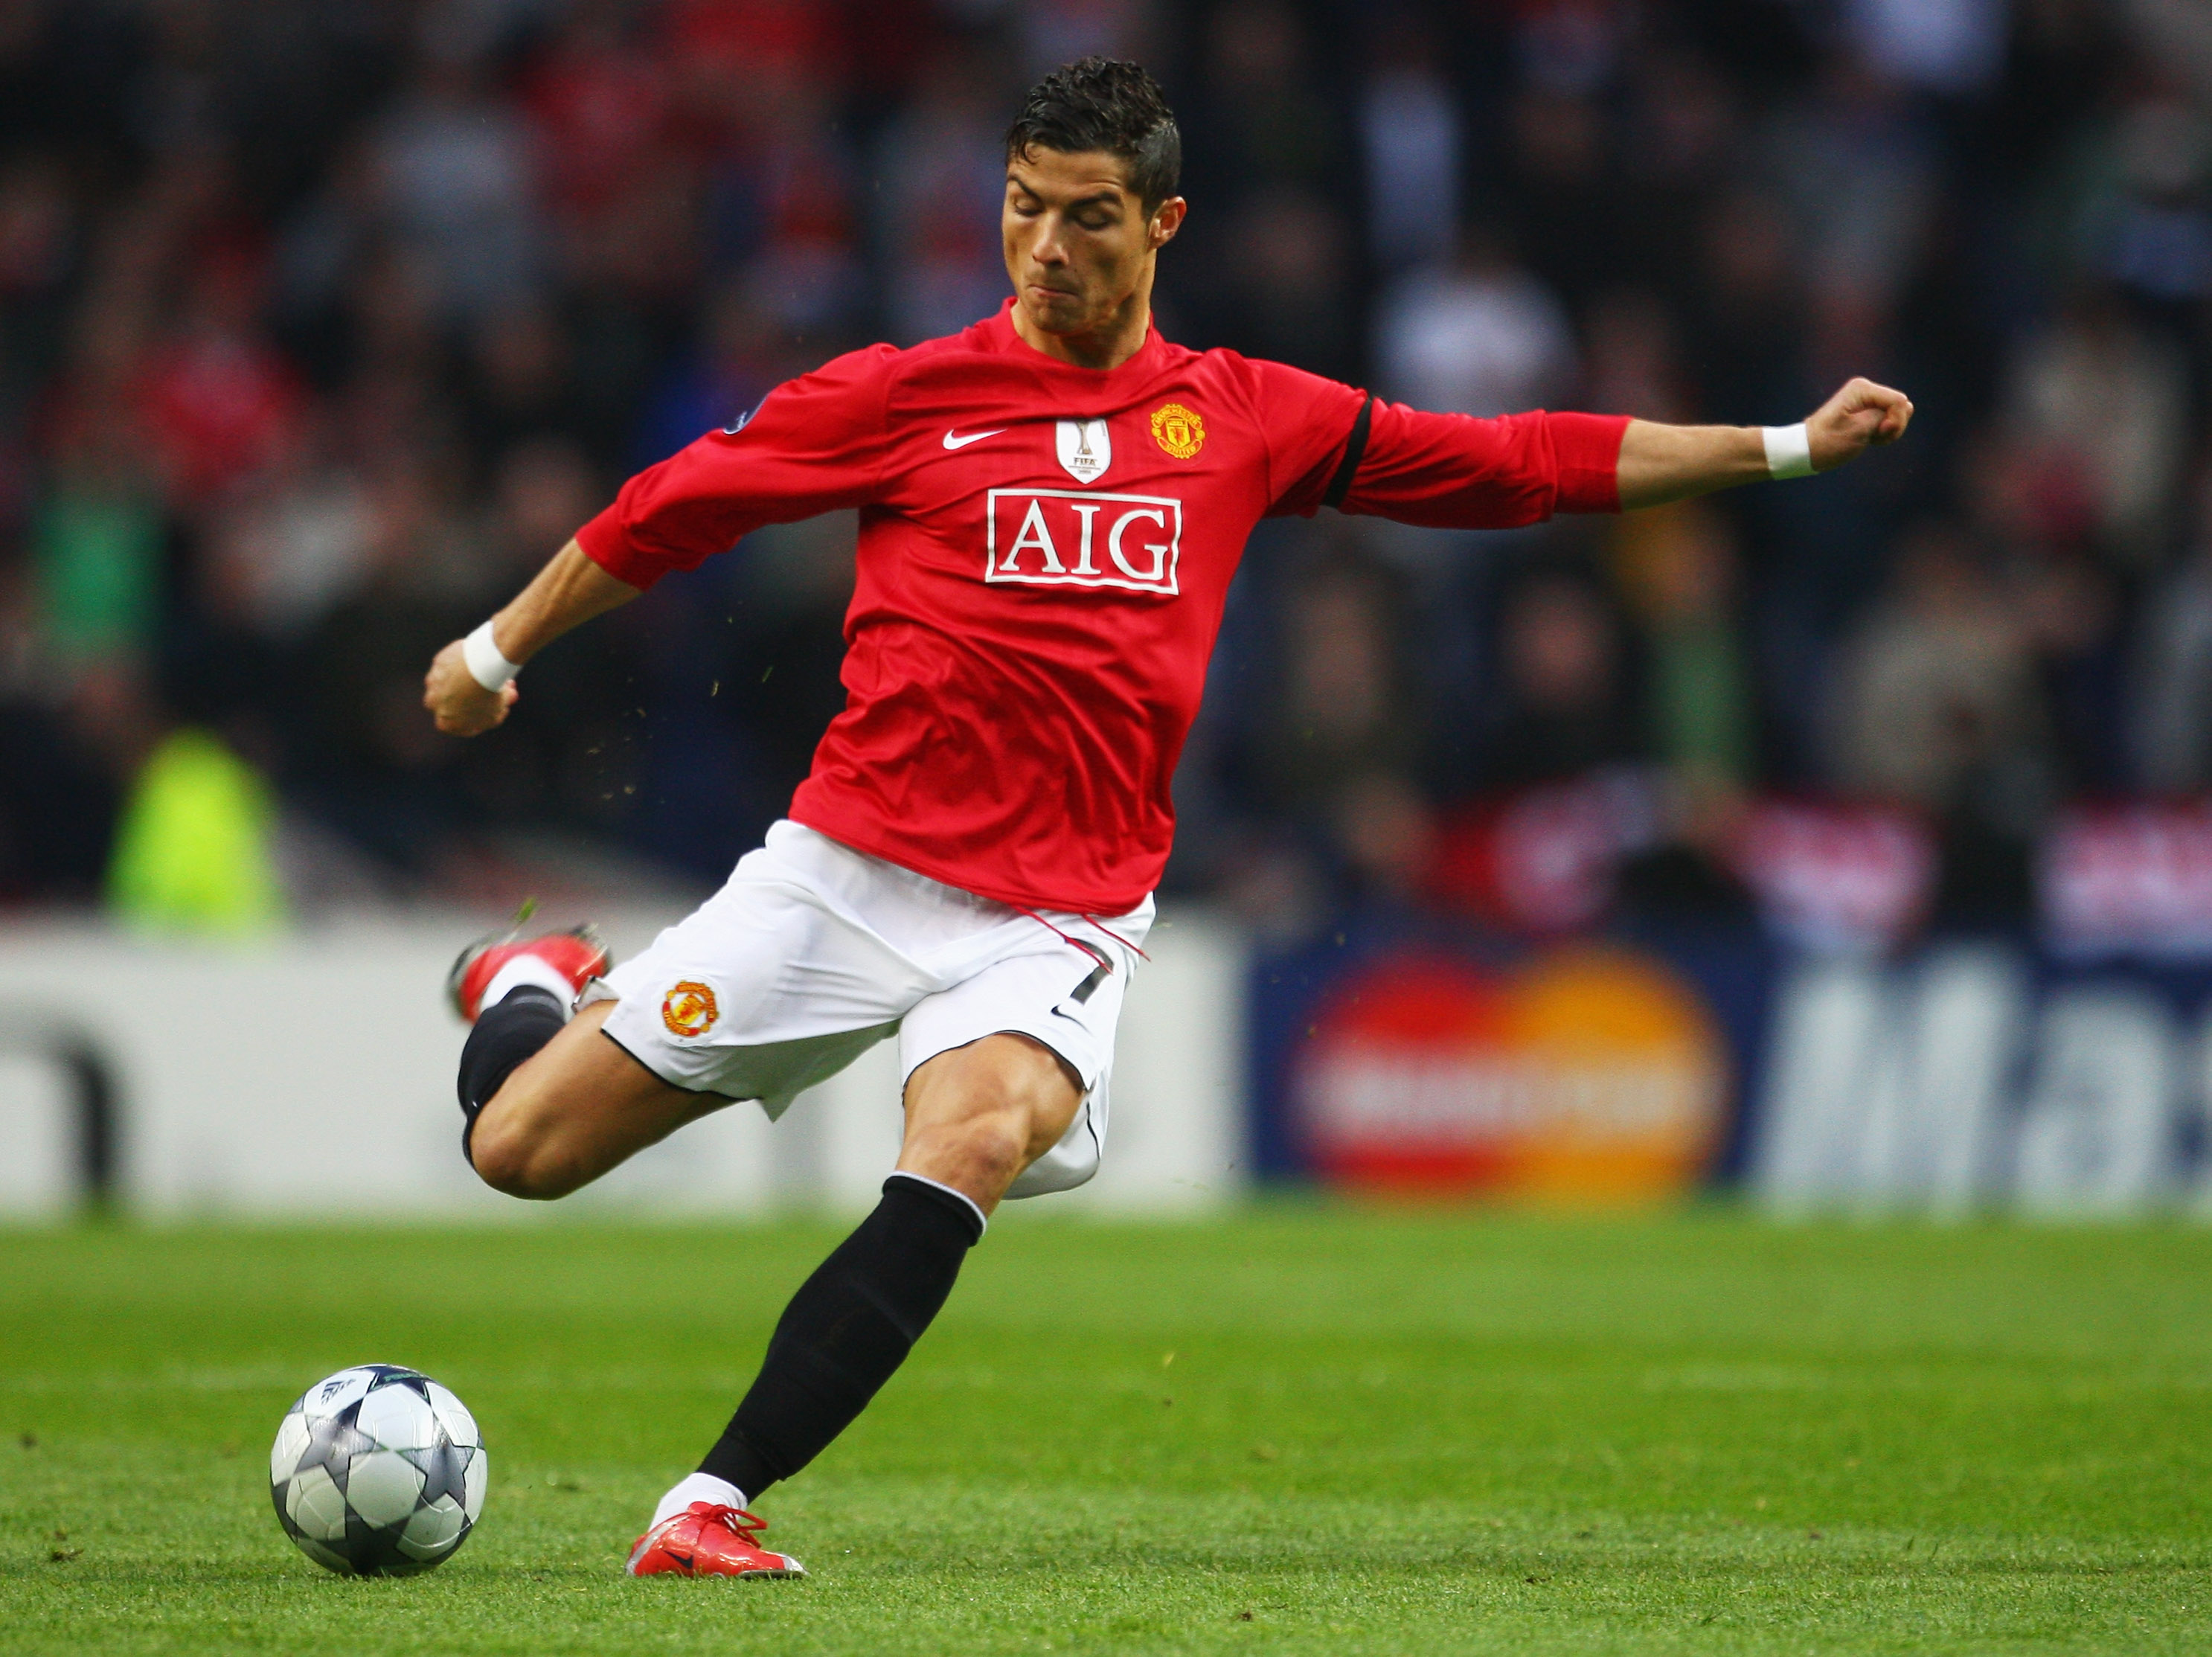 PORTO, PORTUGAL - APRIL 15:  Cristiano Ronaldo of Manchester United scores their first goal during the UEFA Champions League Quarter Final second leg match between FC Porto and Manchester United at the Estadio do Dragao on April 15, 2009 in Porto, Portuga